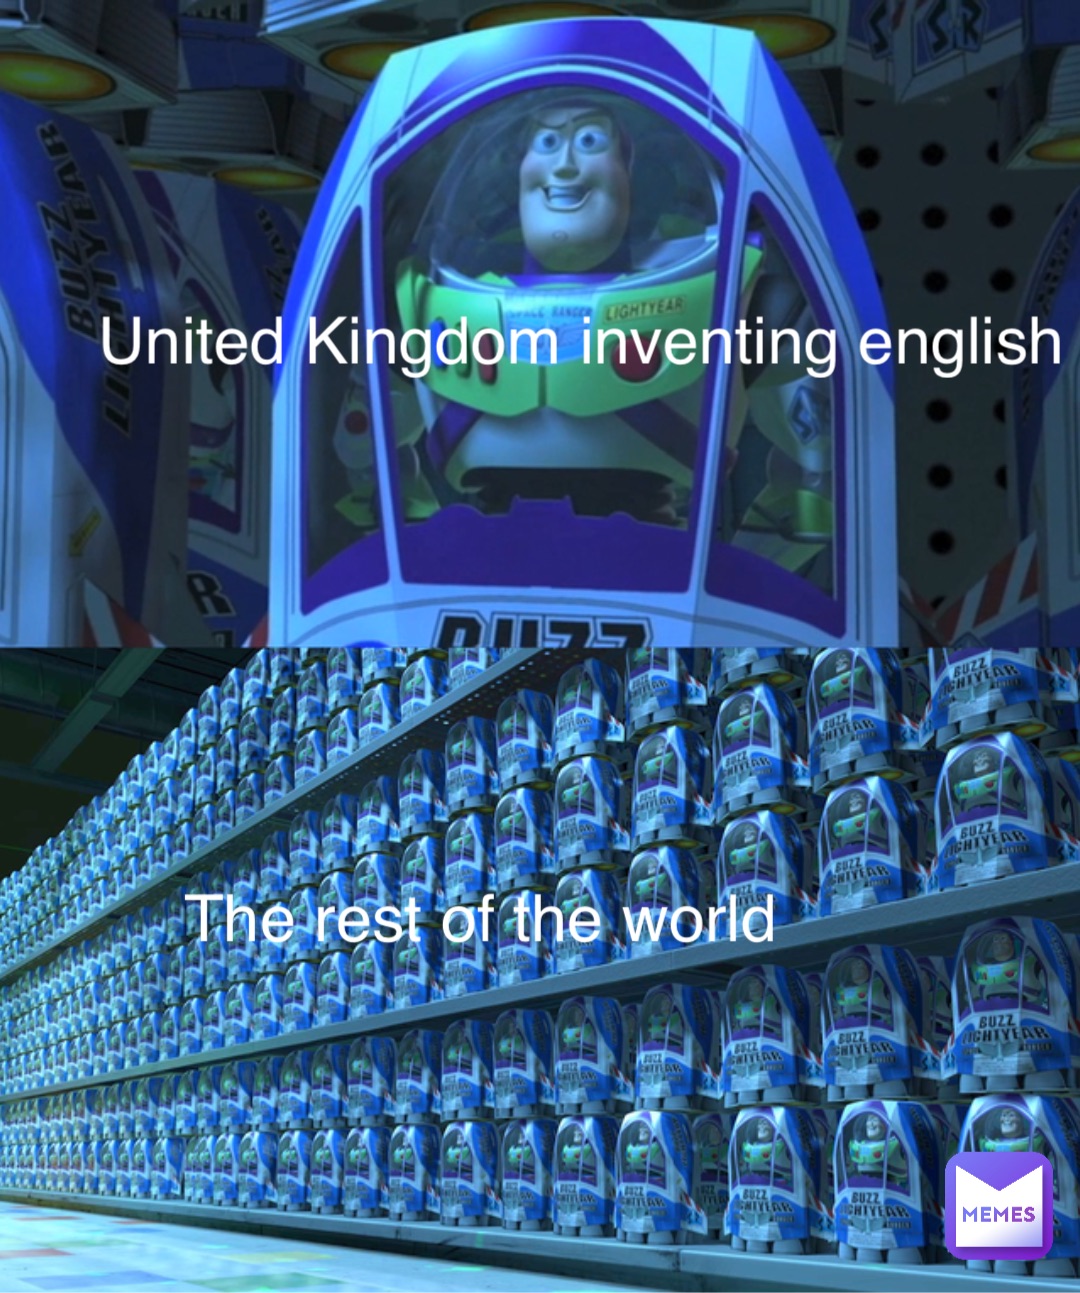 United Kingdom inventing english The rest of the world